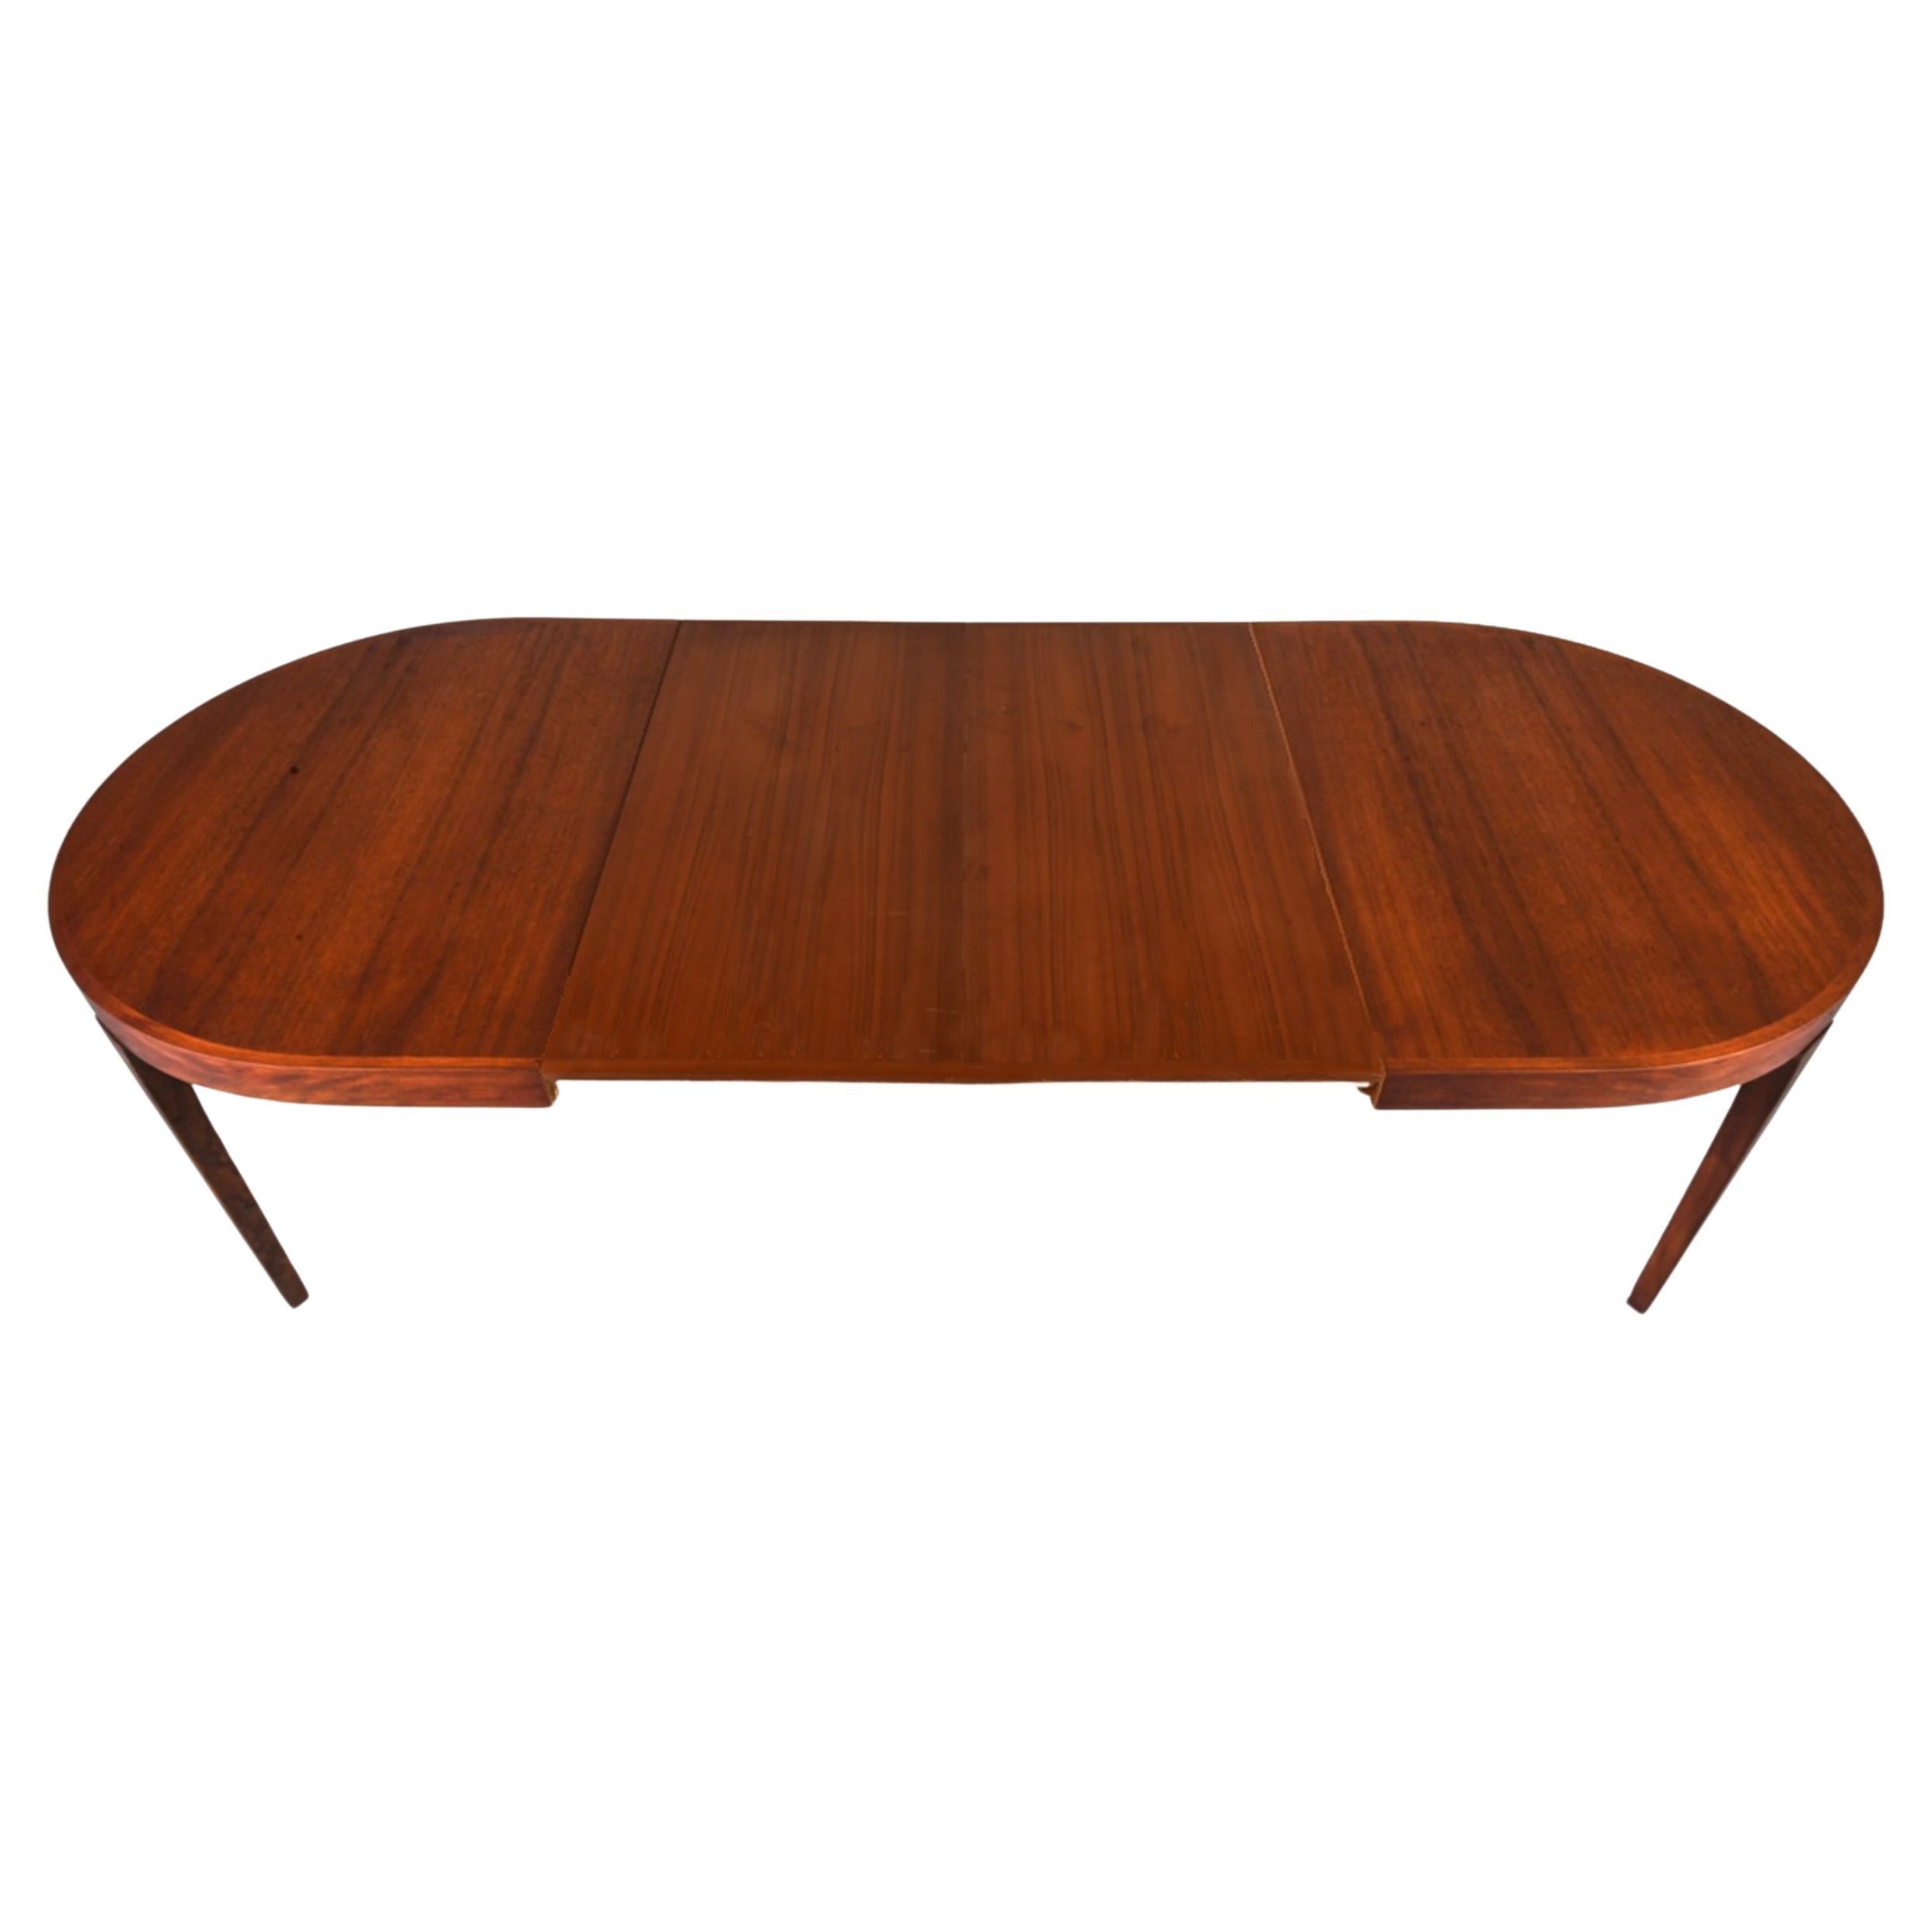 Stunning mid century Teak oval Danish Modern extension dining table with (2) flat leaves. By in the style of Kofod Larsen. This table is in beautiful condition with reddish brown teak tones very great modern Dining Table. high quality construction